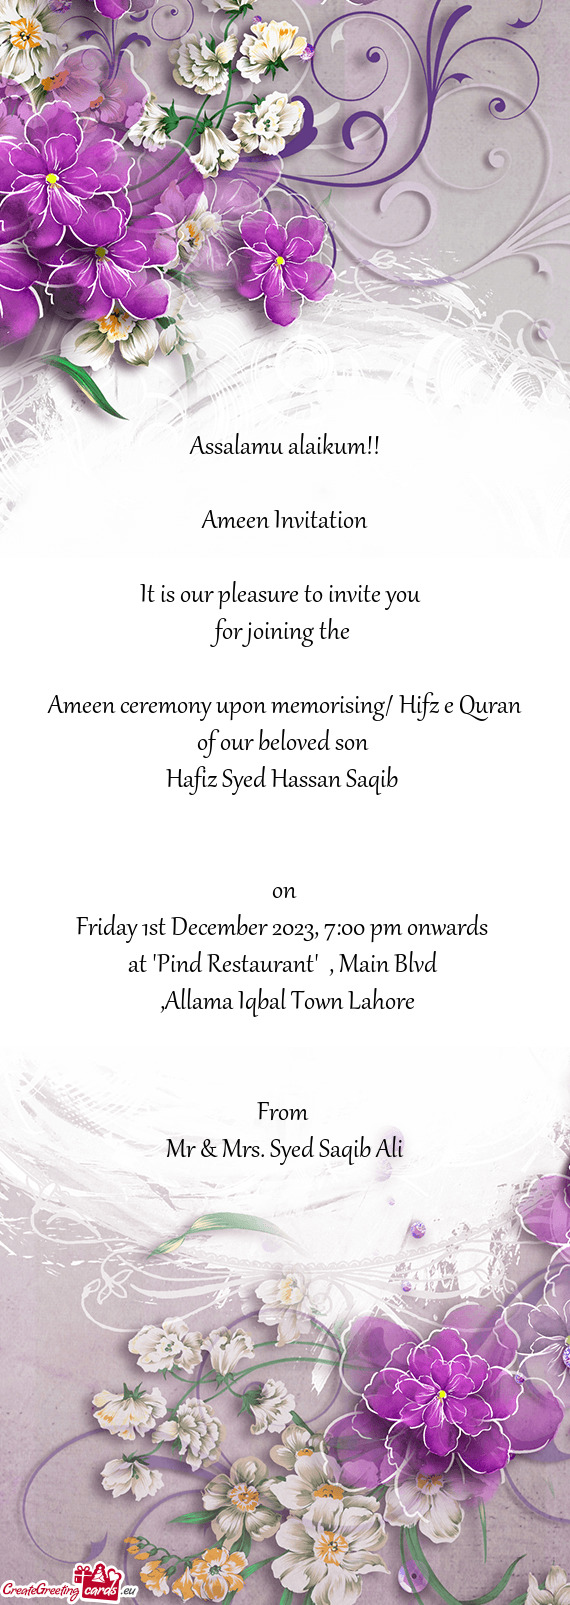 Ameen ceremony upon memorising/ Hifz e Quran of our beloved son